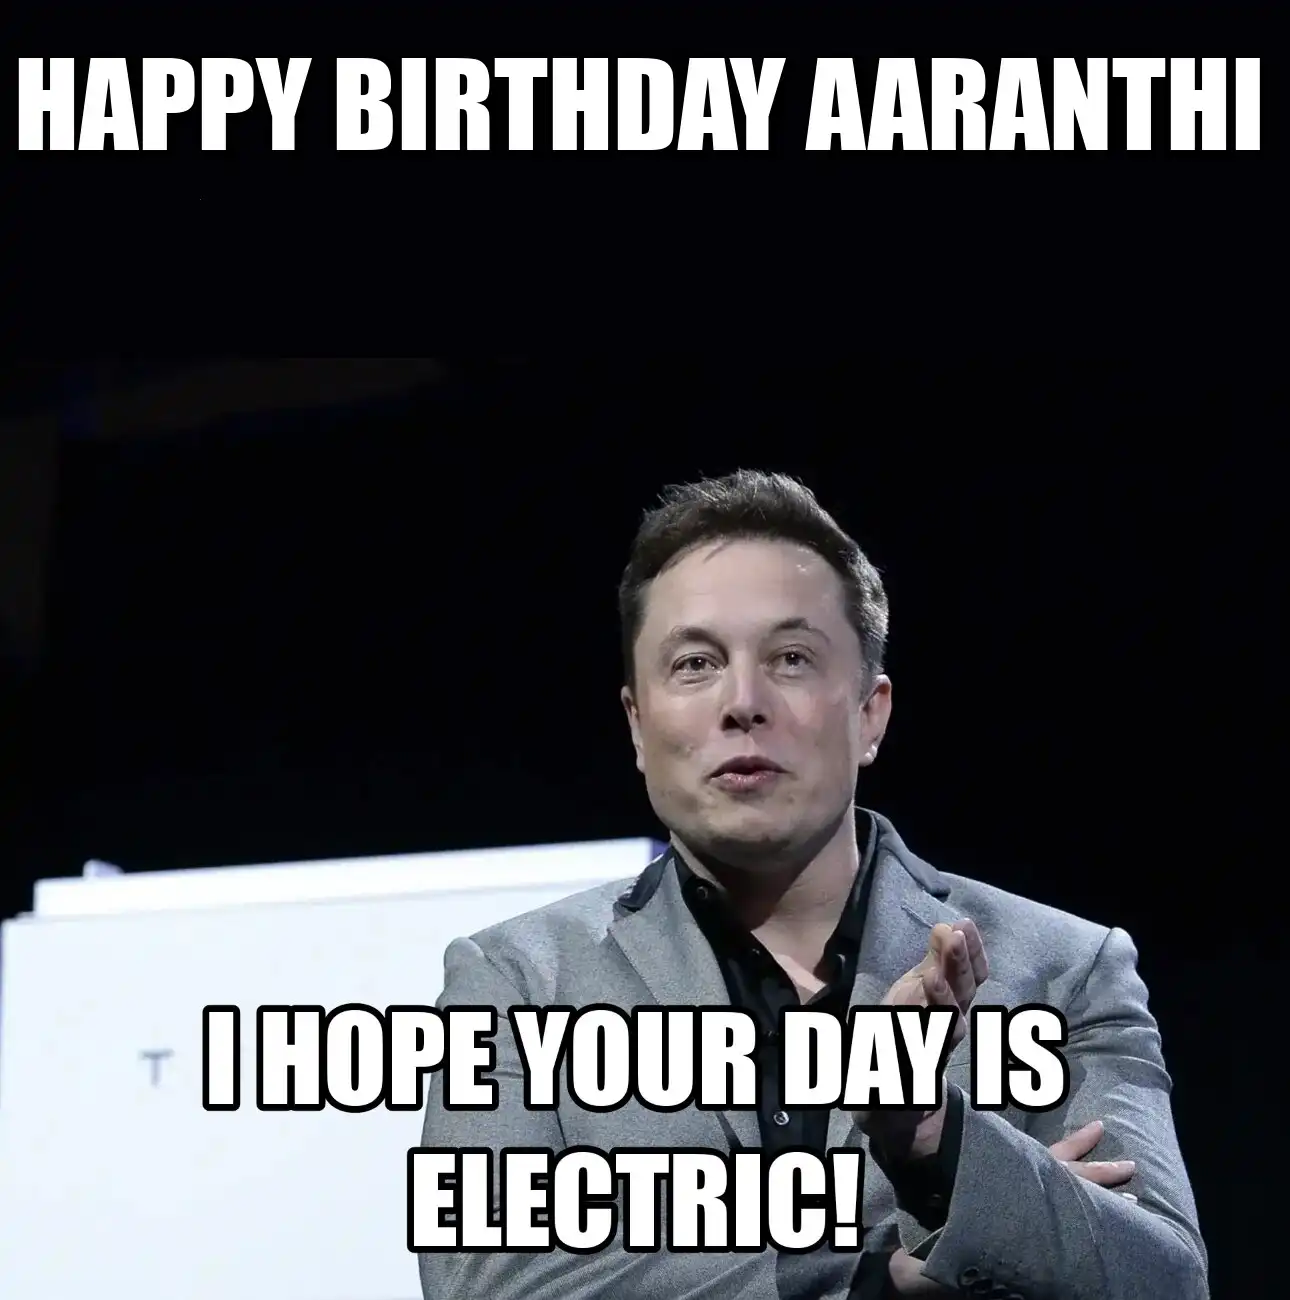 Happy Birthday Aaranthi I Hope Your Day Is Electric Meme